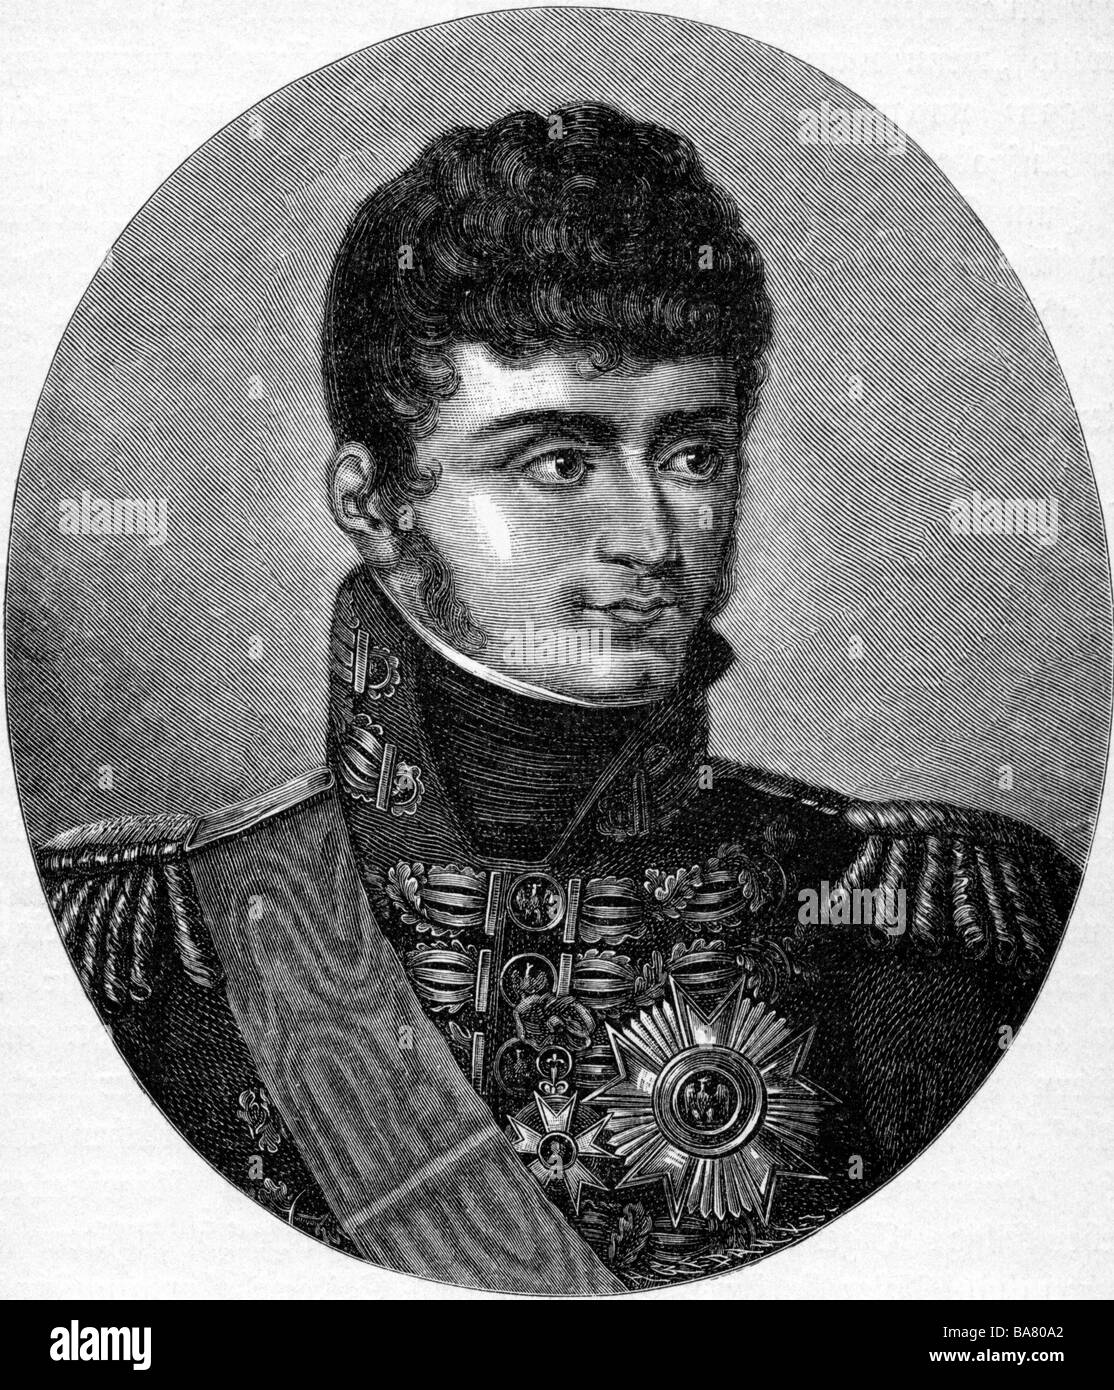 Bonaparte, Jerome, 15.11.1784 - 24.6.1860, King of Westphalia 1807 - 1813, portrait, copper engraving by Buchhorn after painting by Francois Joseph Kinson, 19th century, Artist's Copyright has not to be cleared Stock Photo